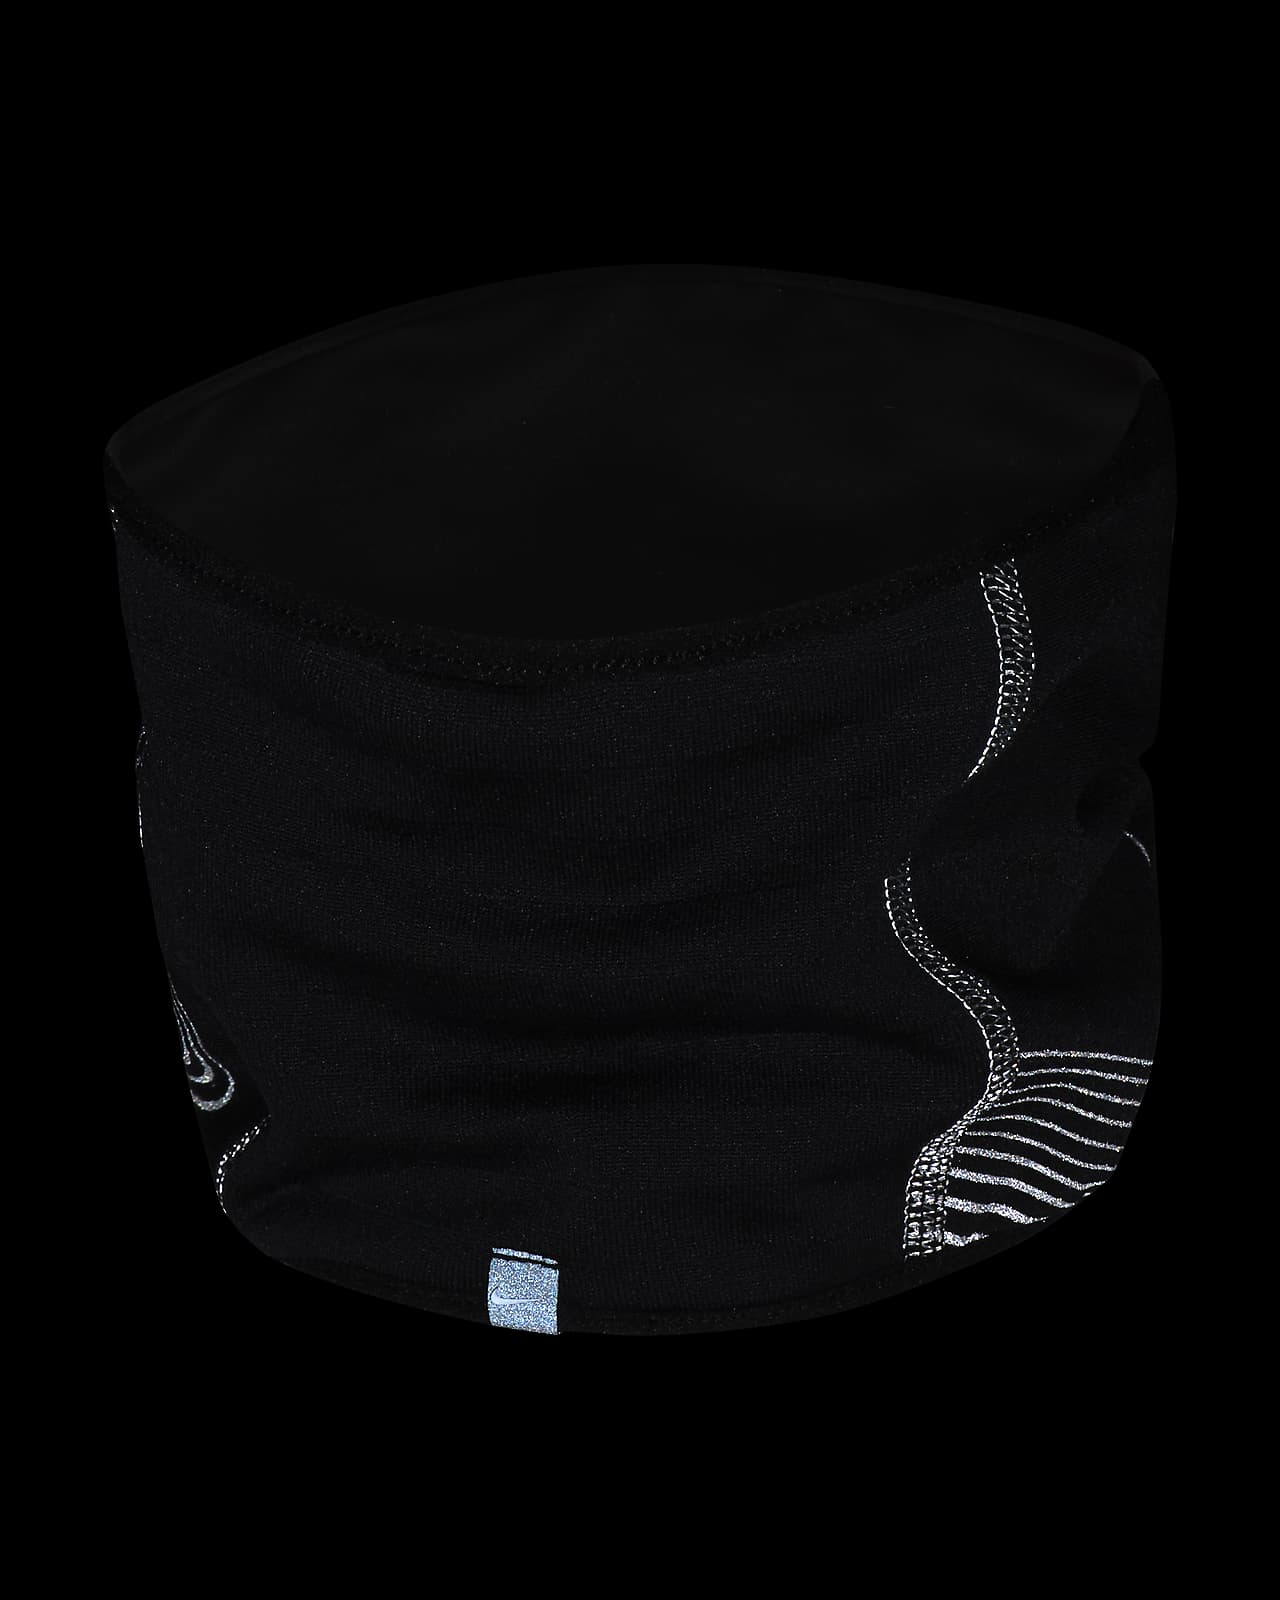 Nike Therma-FIT 360 Neck Warmer.